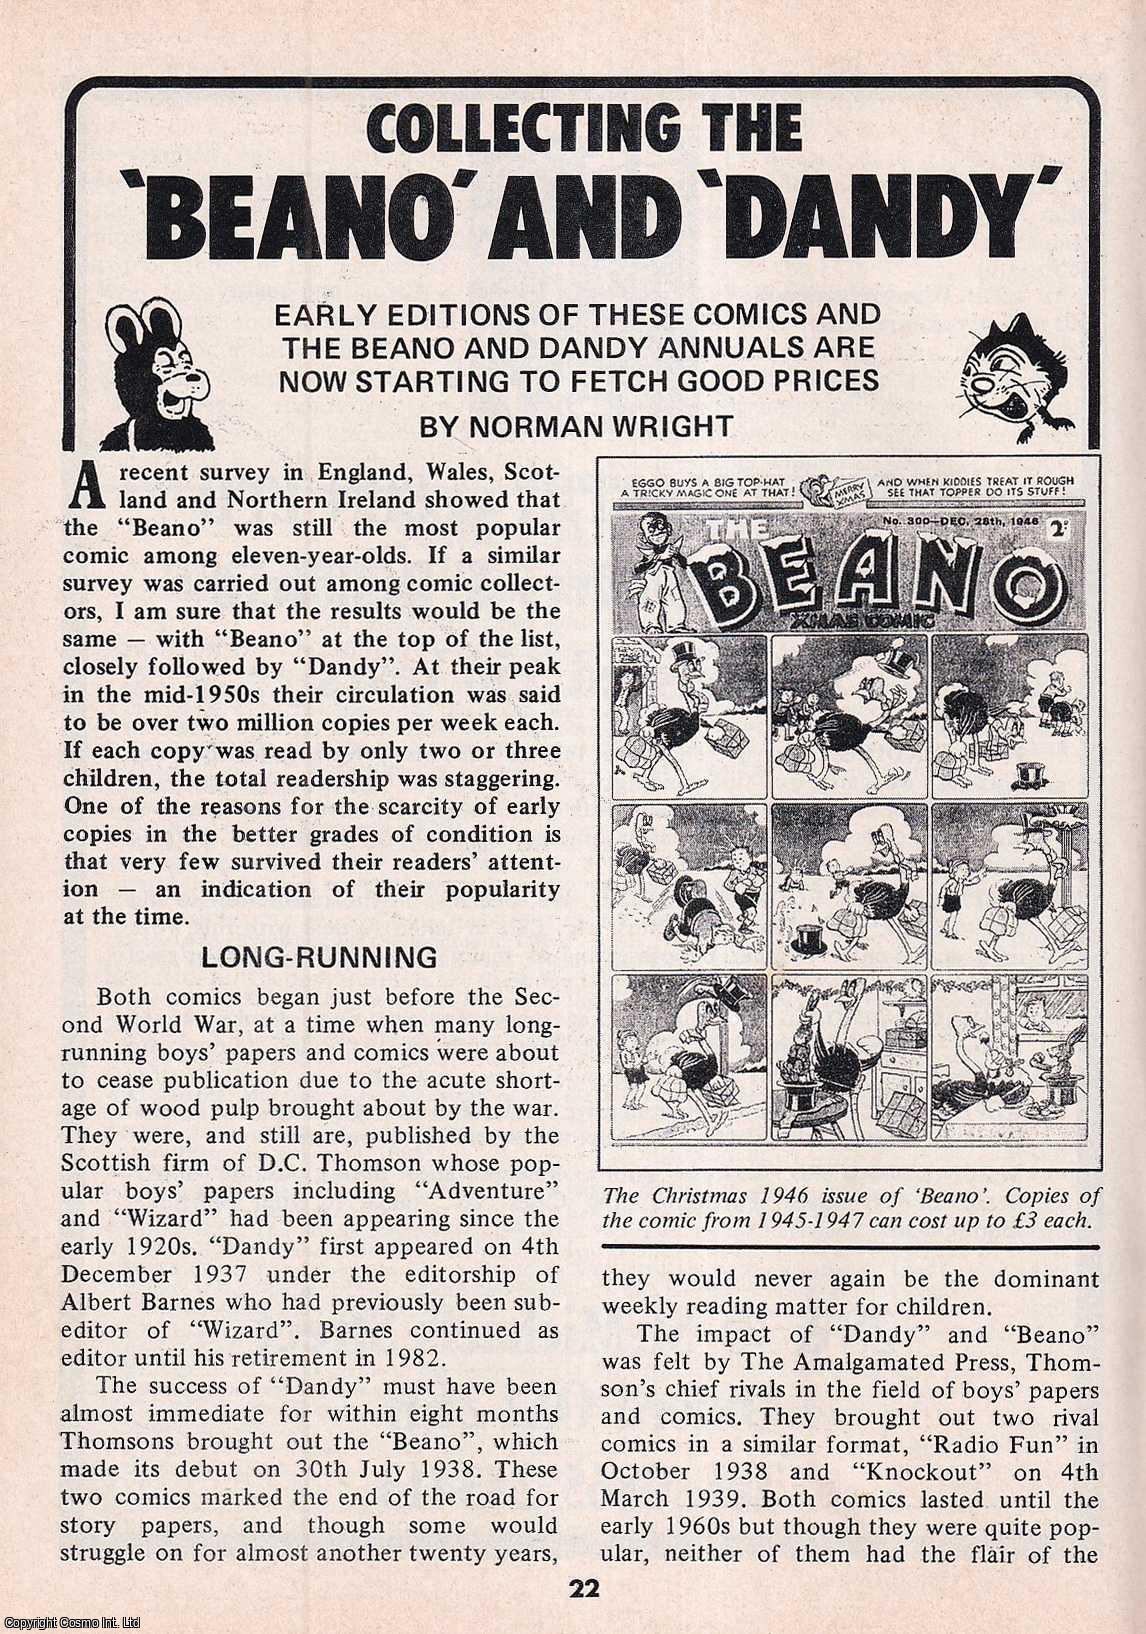 Norman Wright - Collecting The Beano & Dandy Annuals. This is an original article separated from an issue of The Book & Magazine Collector publication.